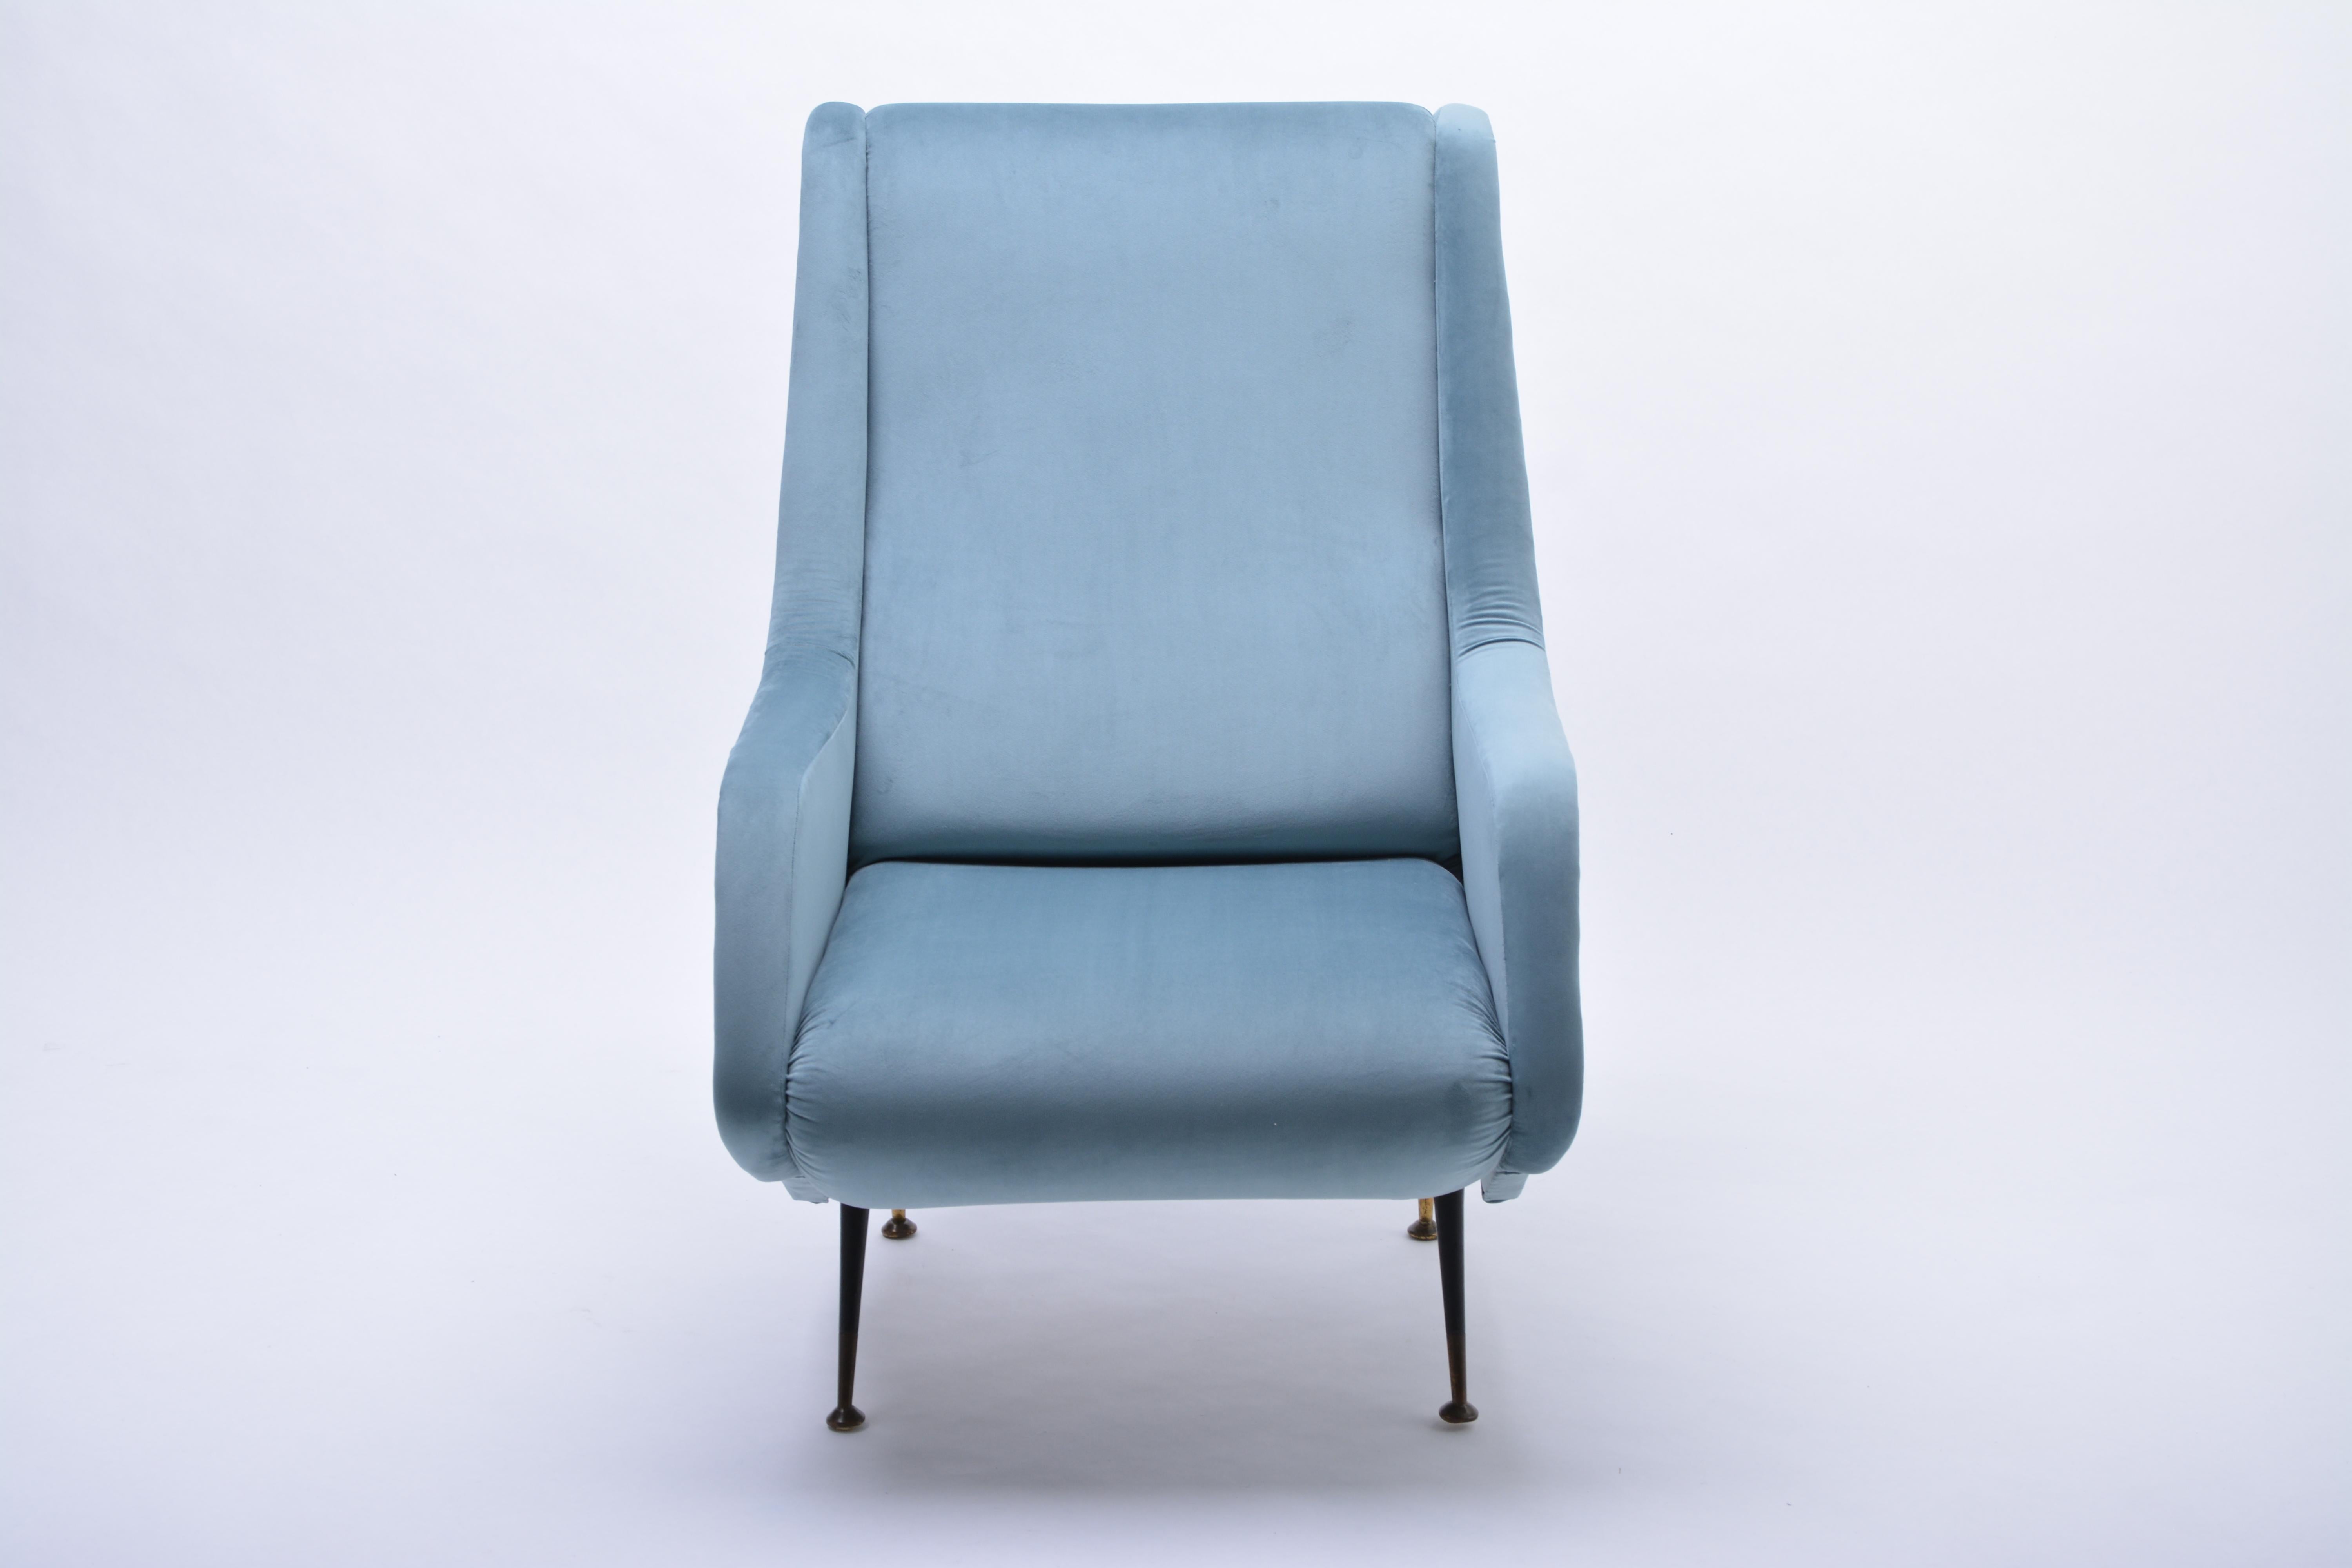 Blue reupholstered Mid-Century Italian armchair in the style of Aldo Morbelli

This chair was produced in Italy in the 1950s. The chair has been restored and reupholstered with a velour fabric in powder blue. The legs are made of metal and brass.